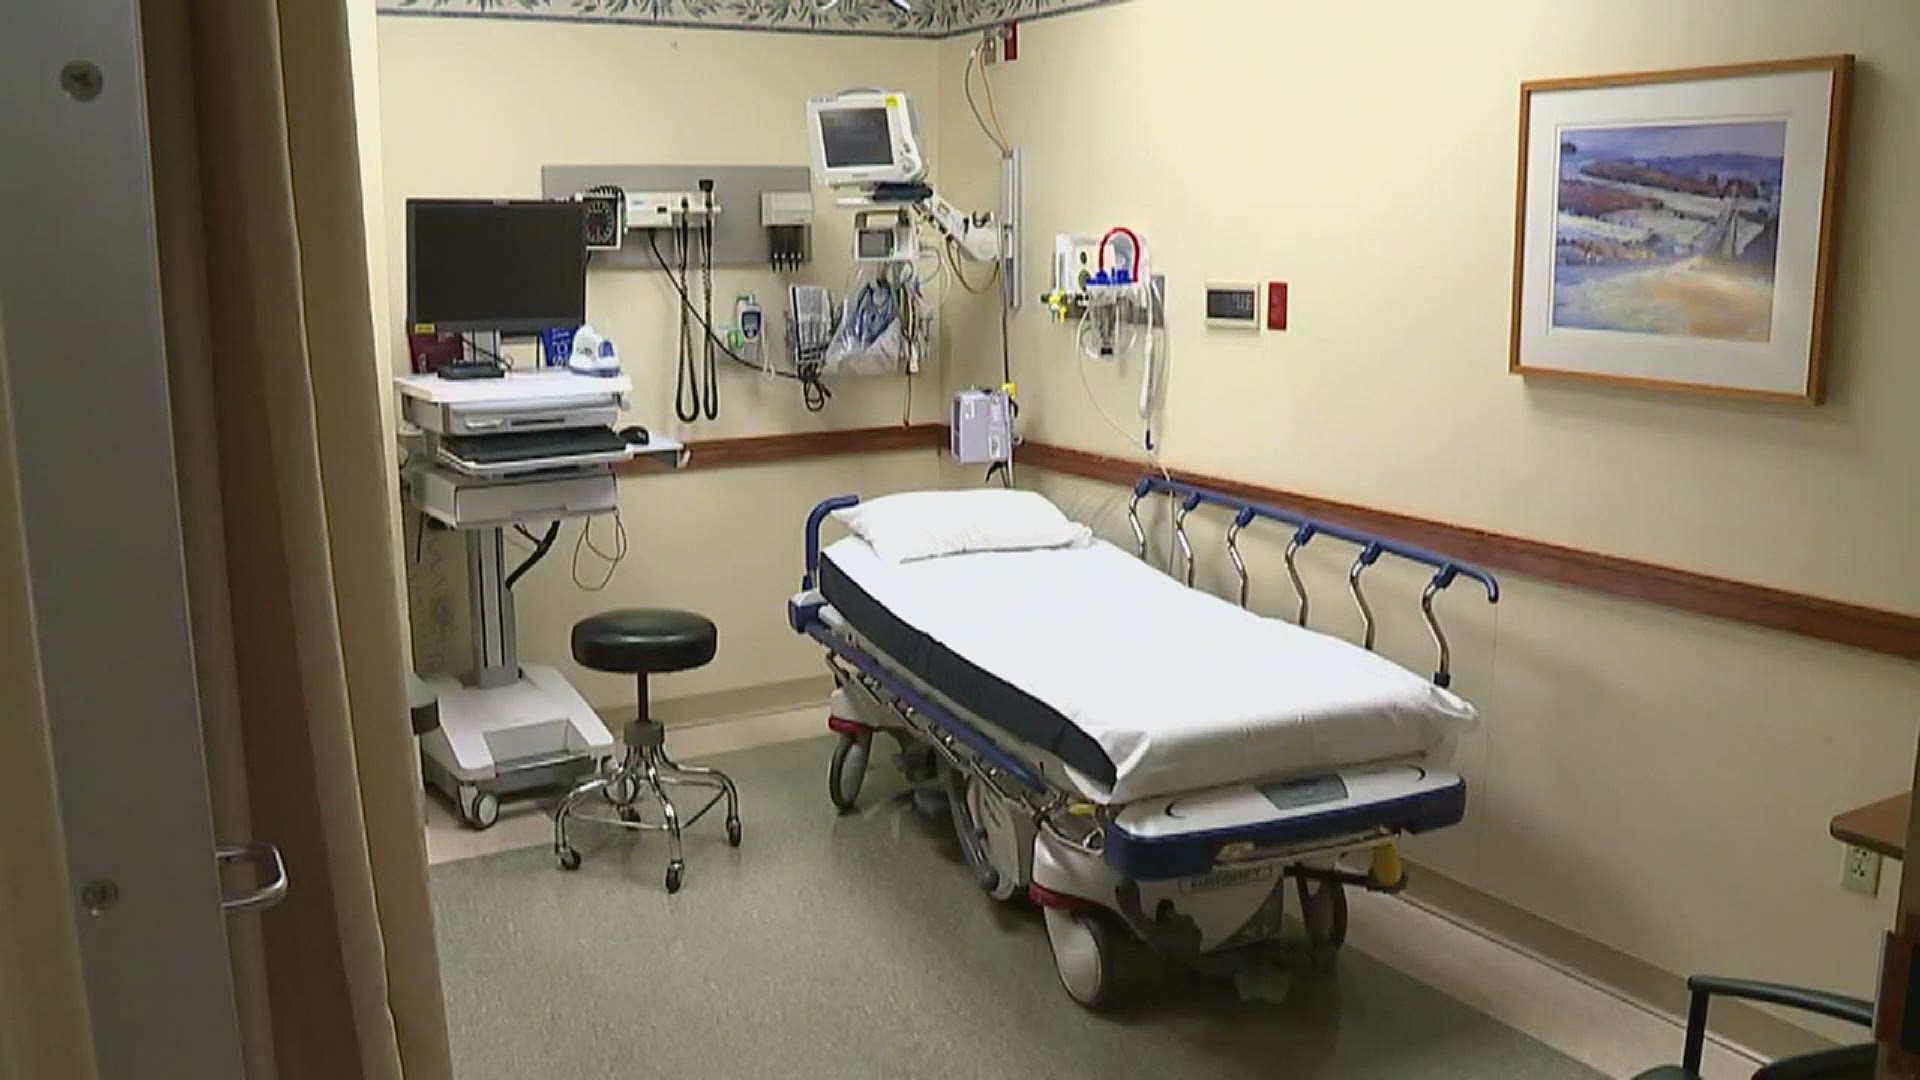 Some hospitals in the Quad Cities are seeing a rise in the number of patients being treated for COVID-19.